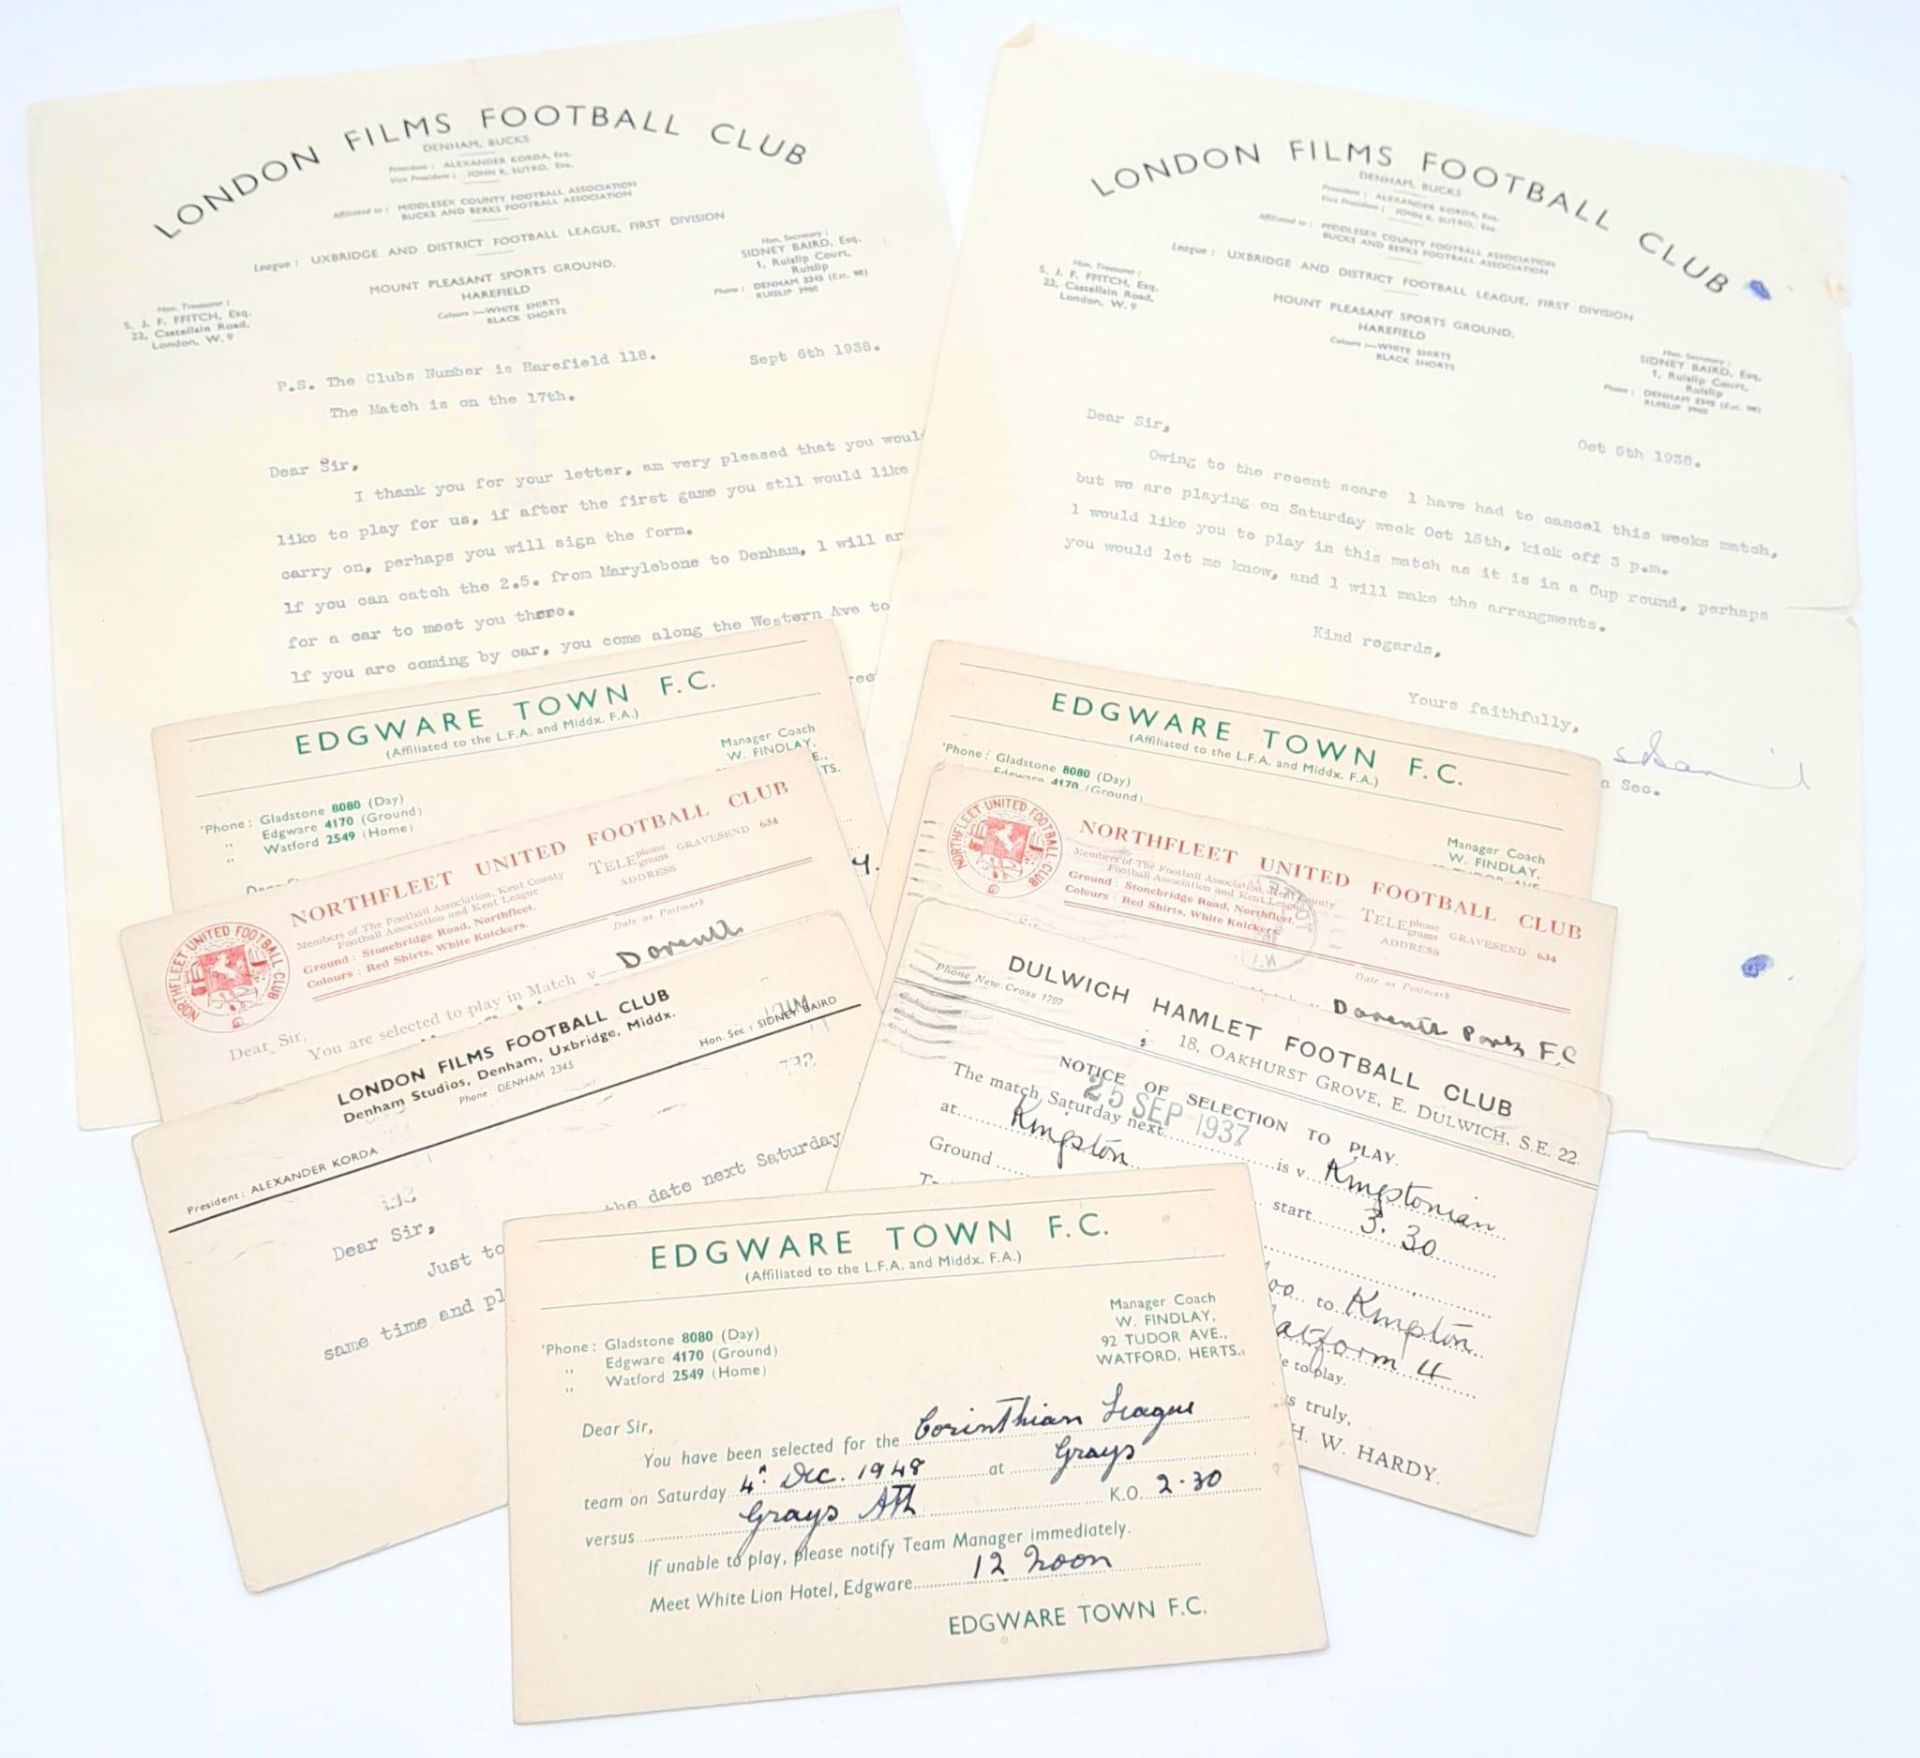 An Eclectic Piece of Football Memorabilia - Two letters from London Films football club believe to